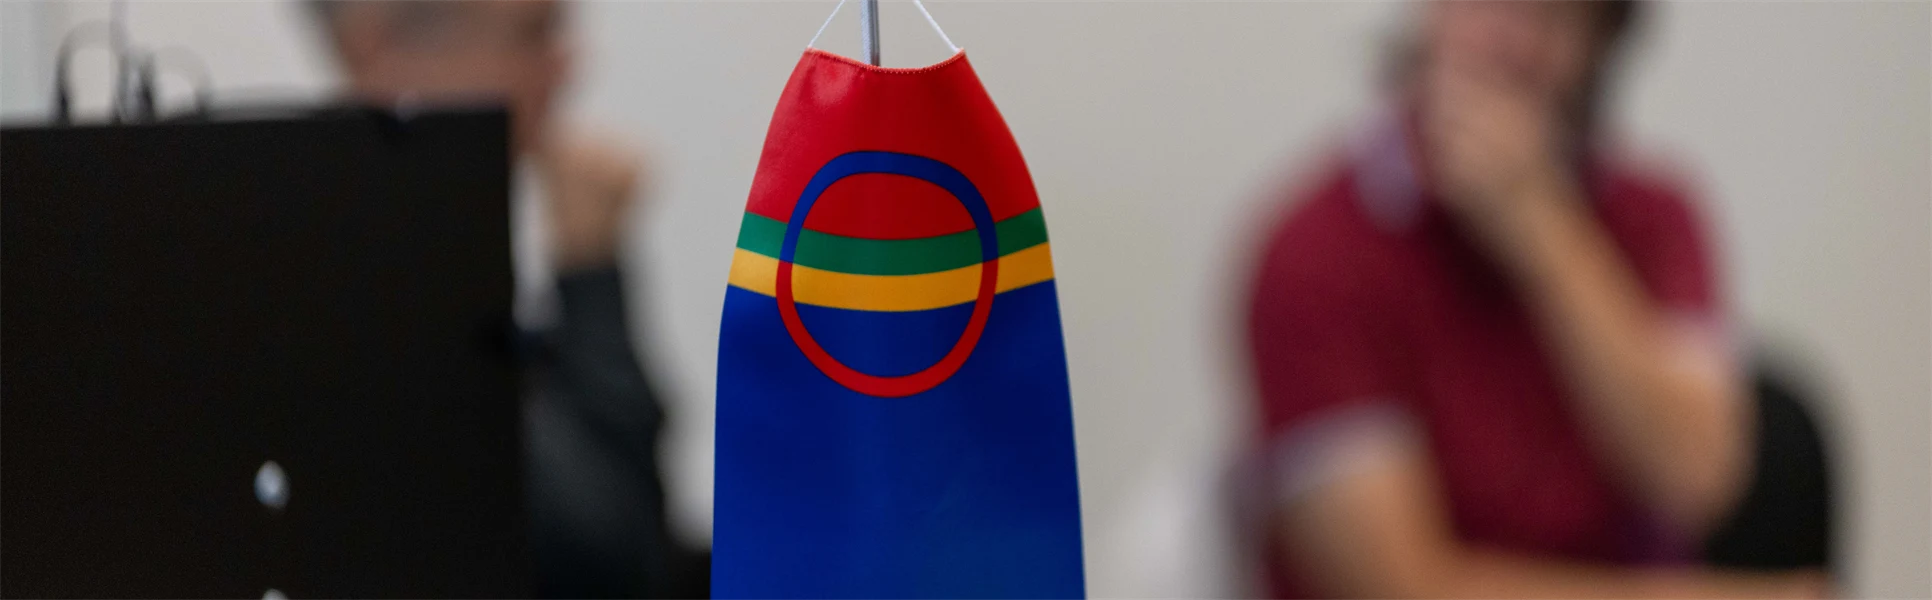 The Sami flag in the foreground and two people out of focus in the background